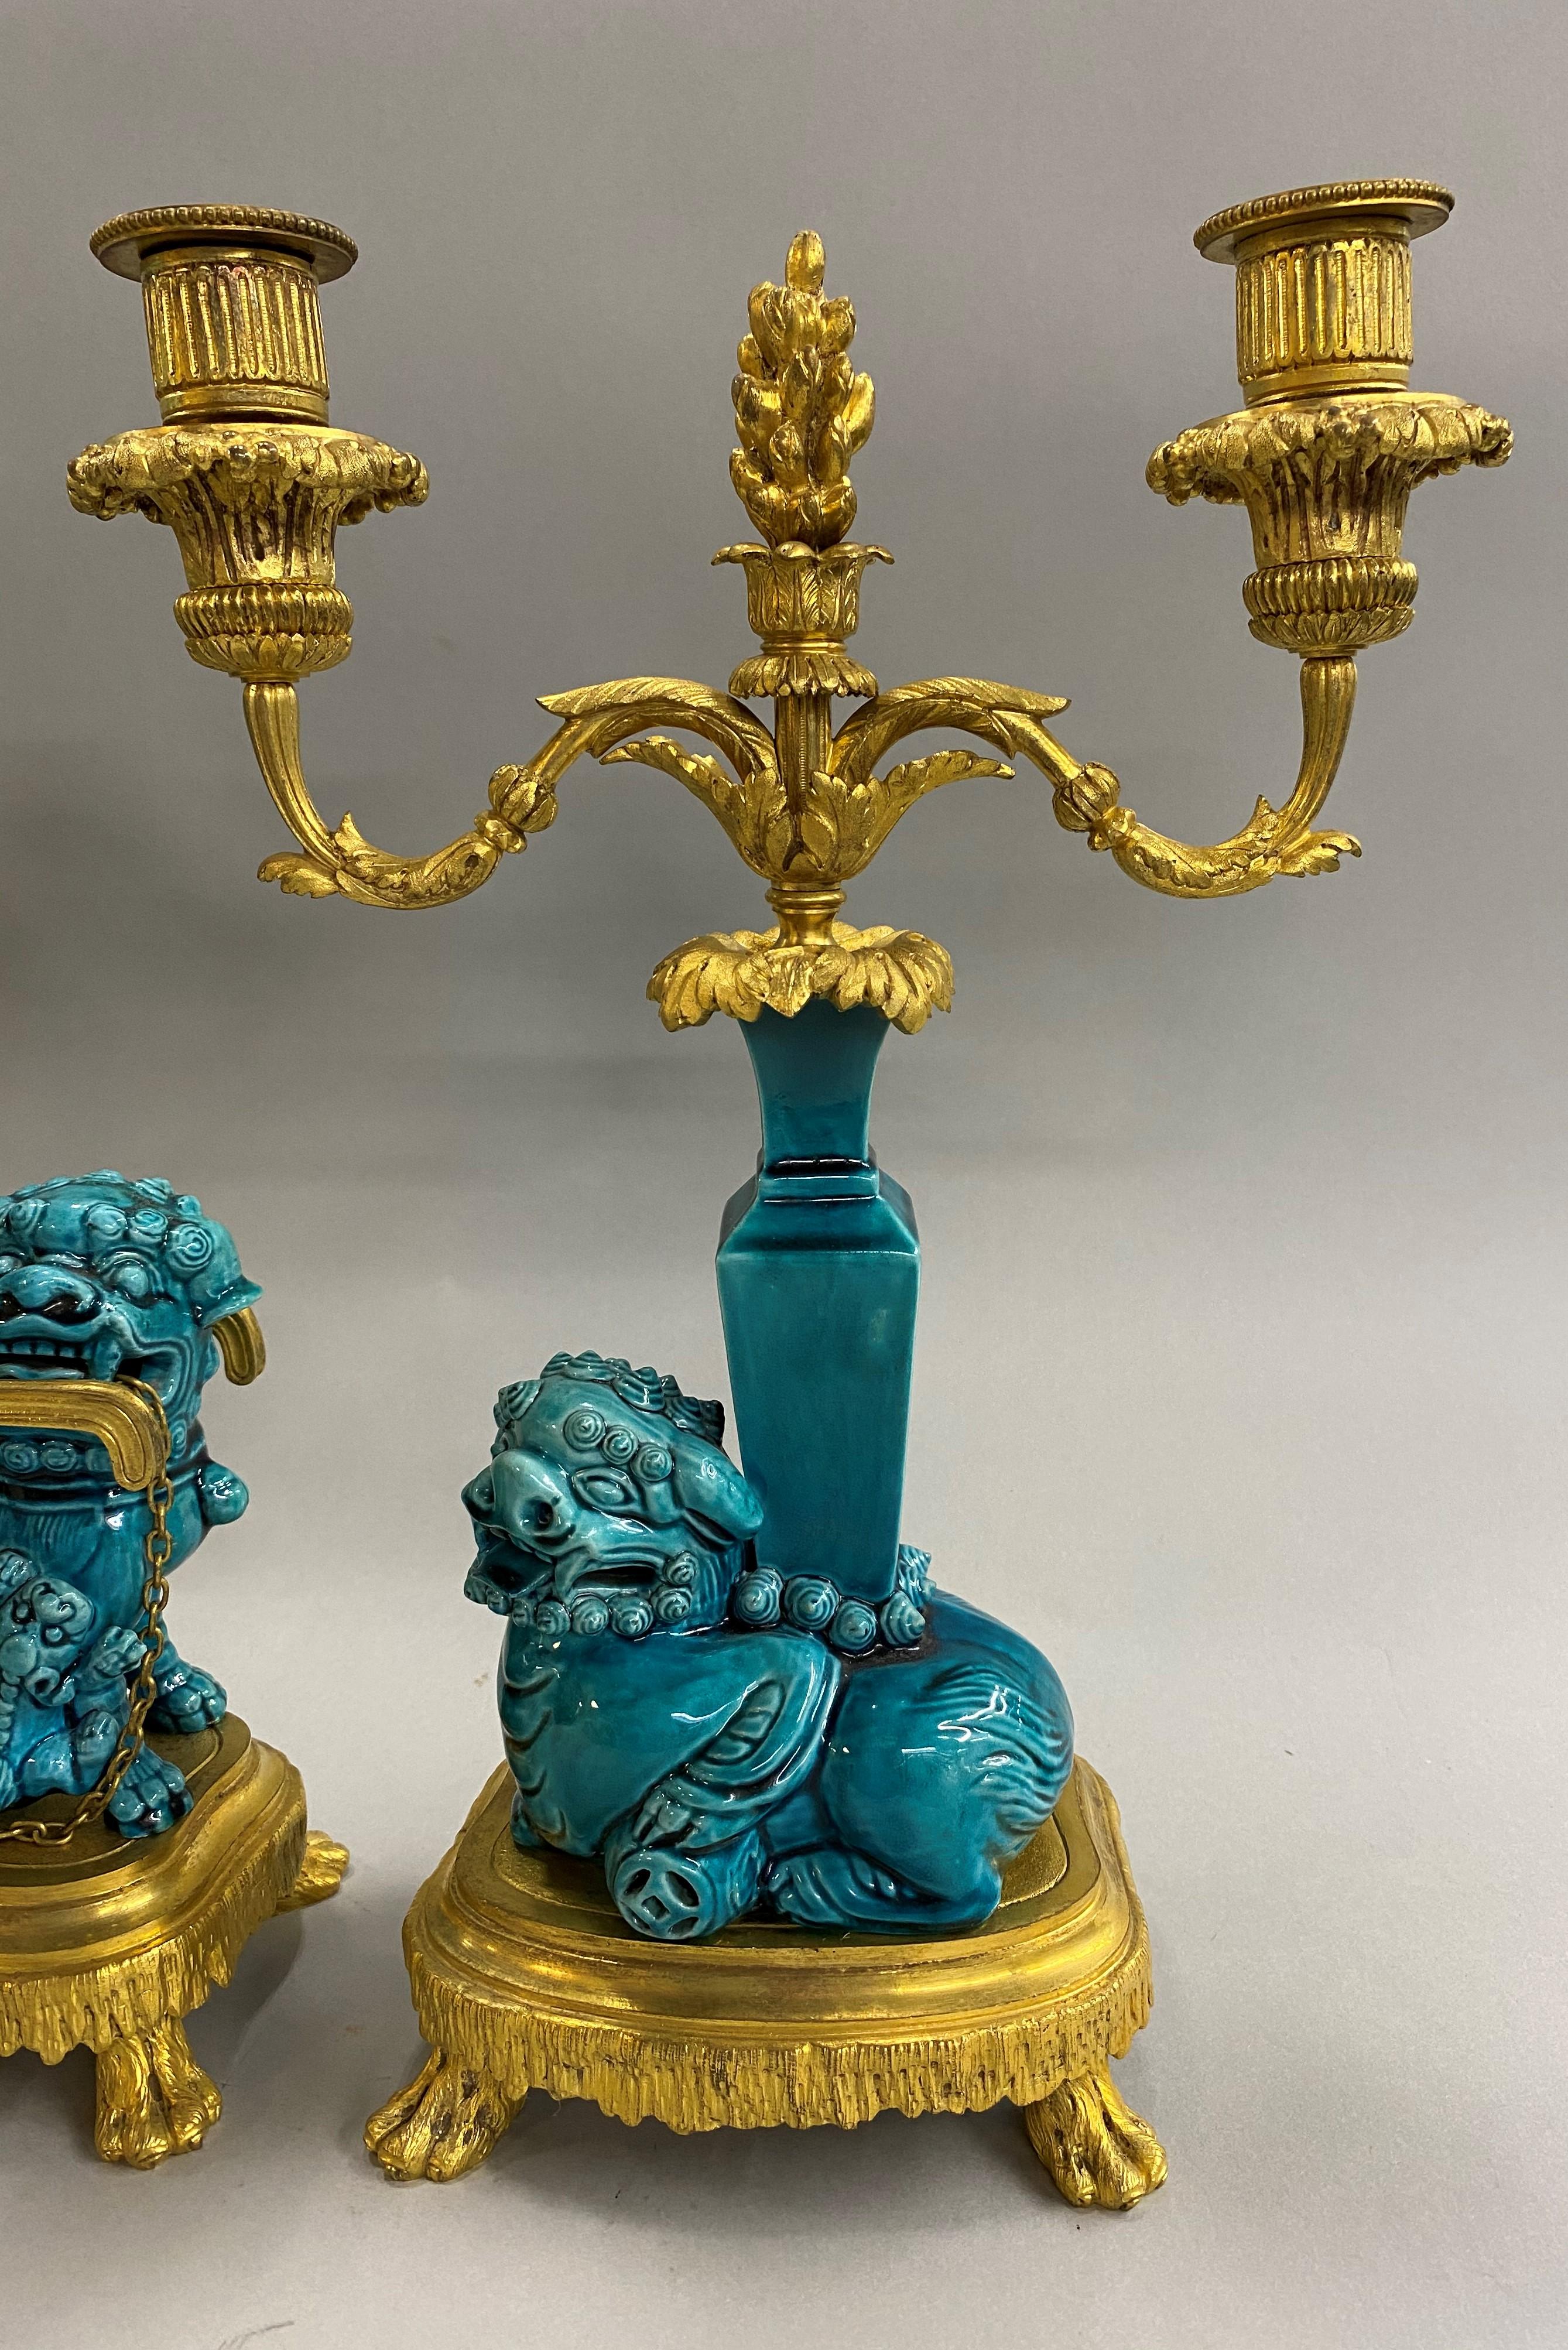 Chinoiserie 19th Century Ormolu French Three-Piece Clock Set in the Chinese Taste